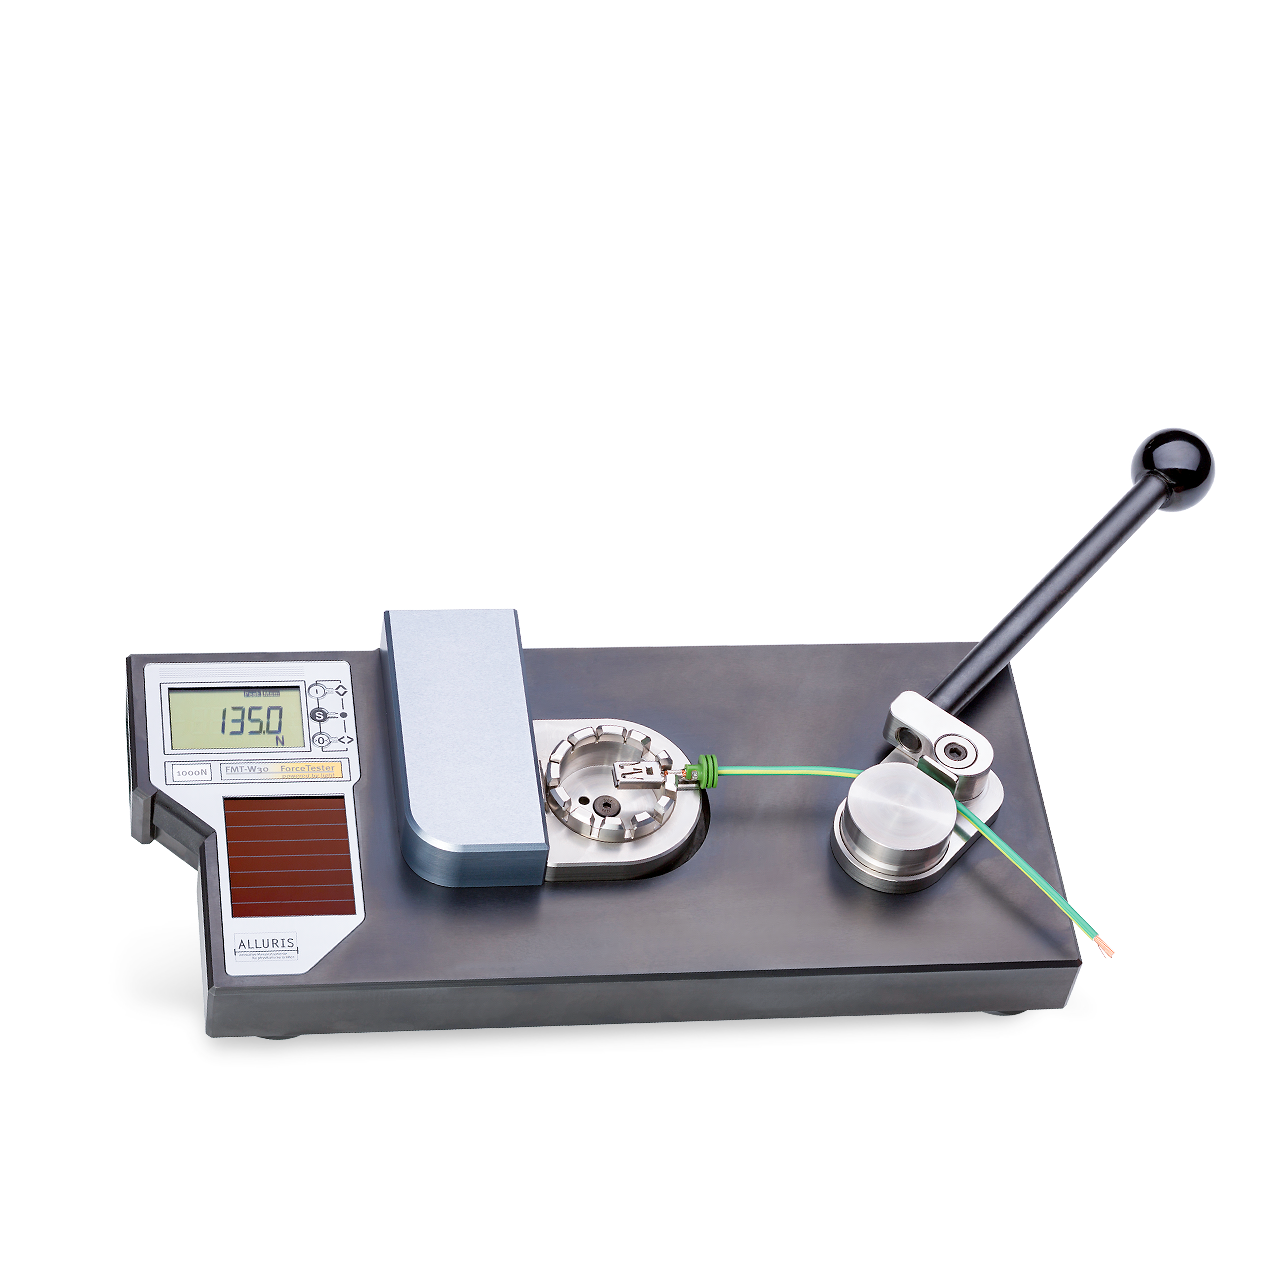 Product shot of wire crimp pull tester by Mecmesin's sister company, Alluris